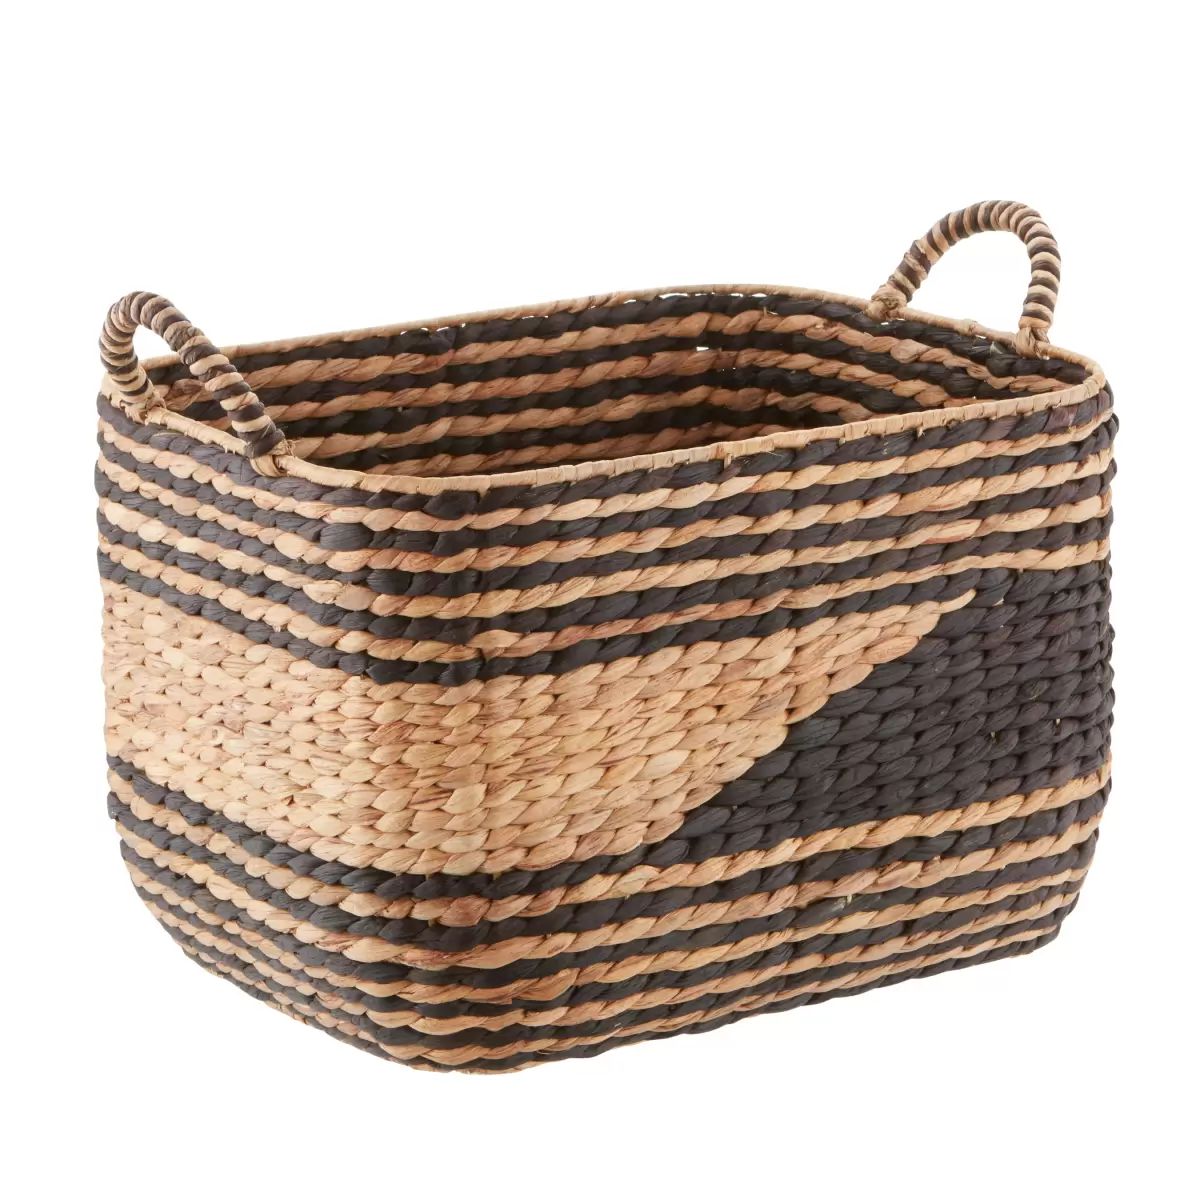 Large Water Hyacinth Basket w/ Handles Natural/Black | The Container Store